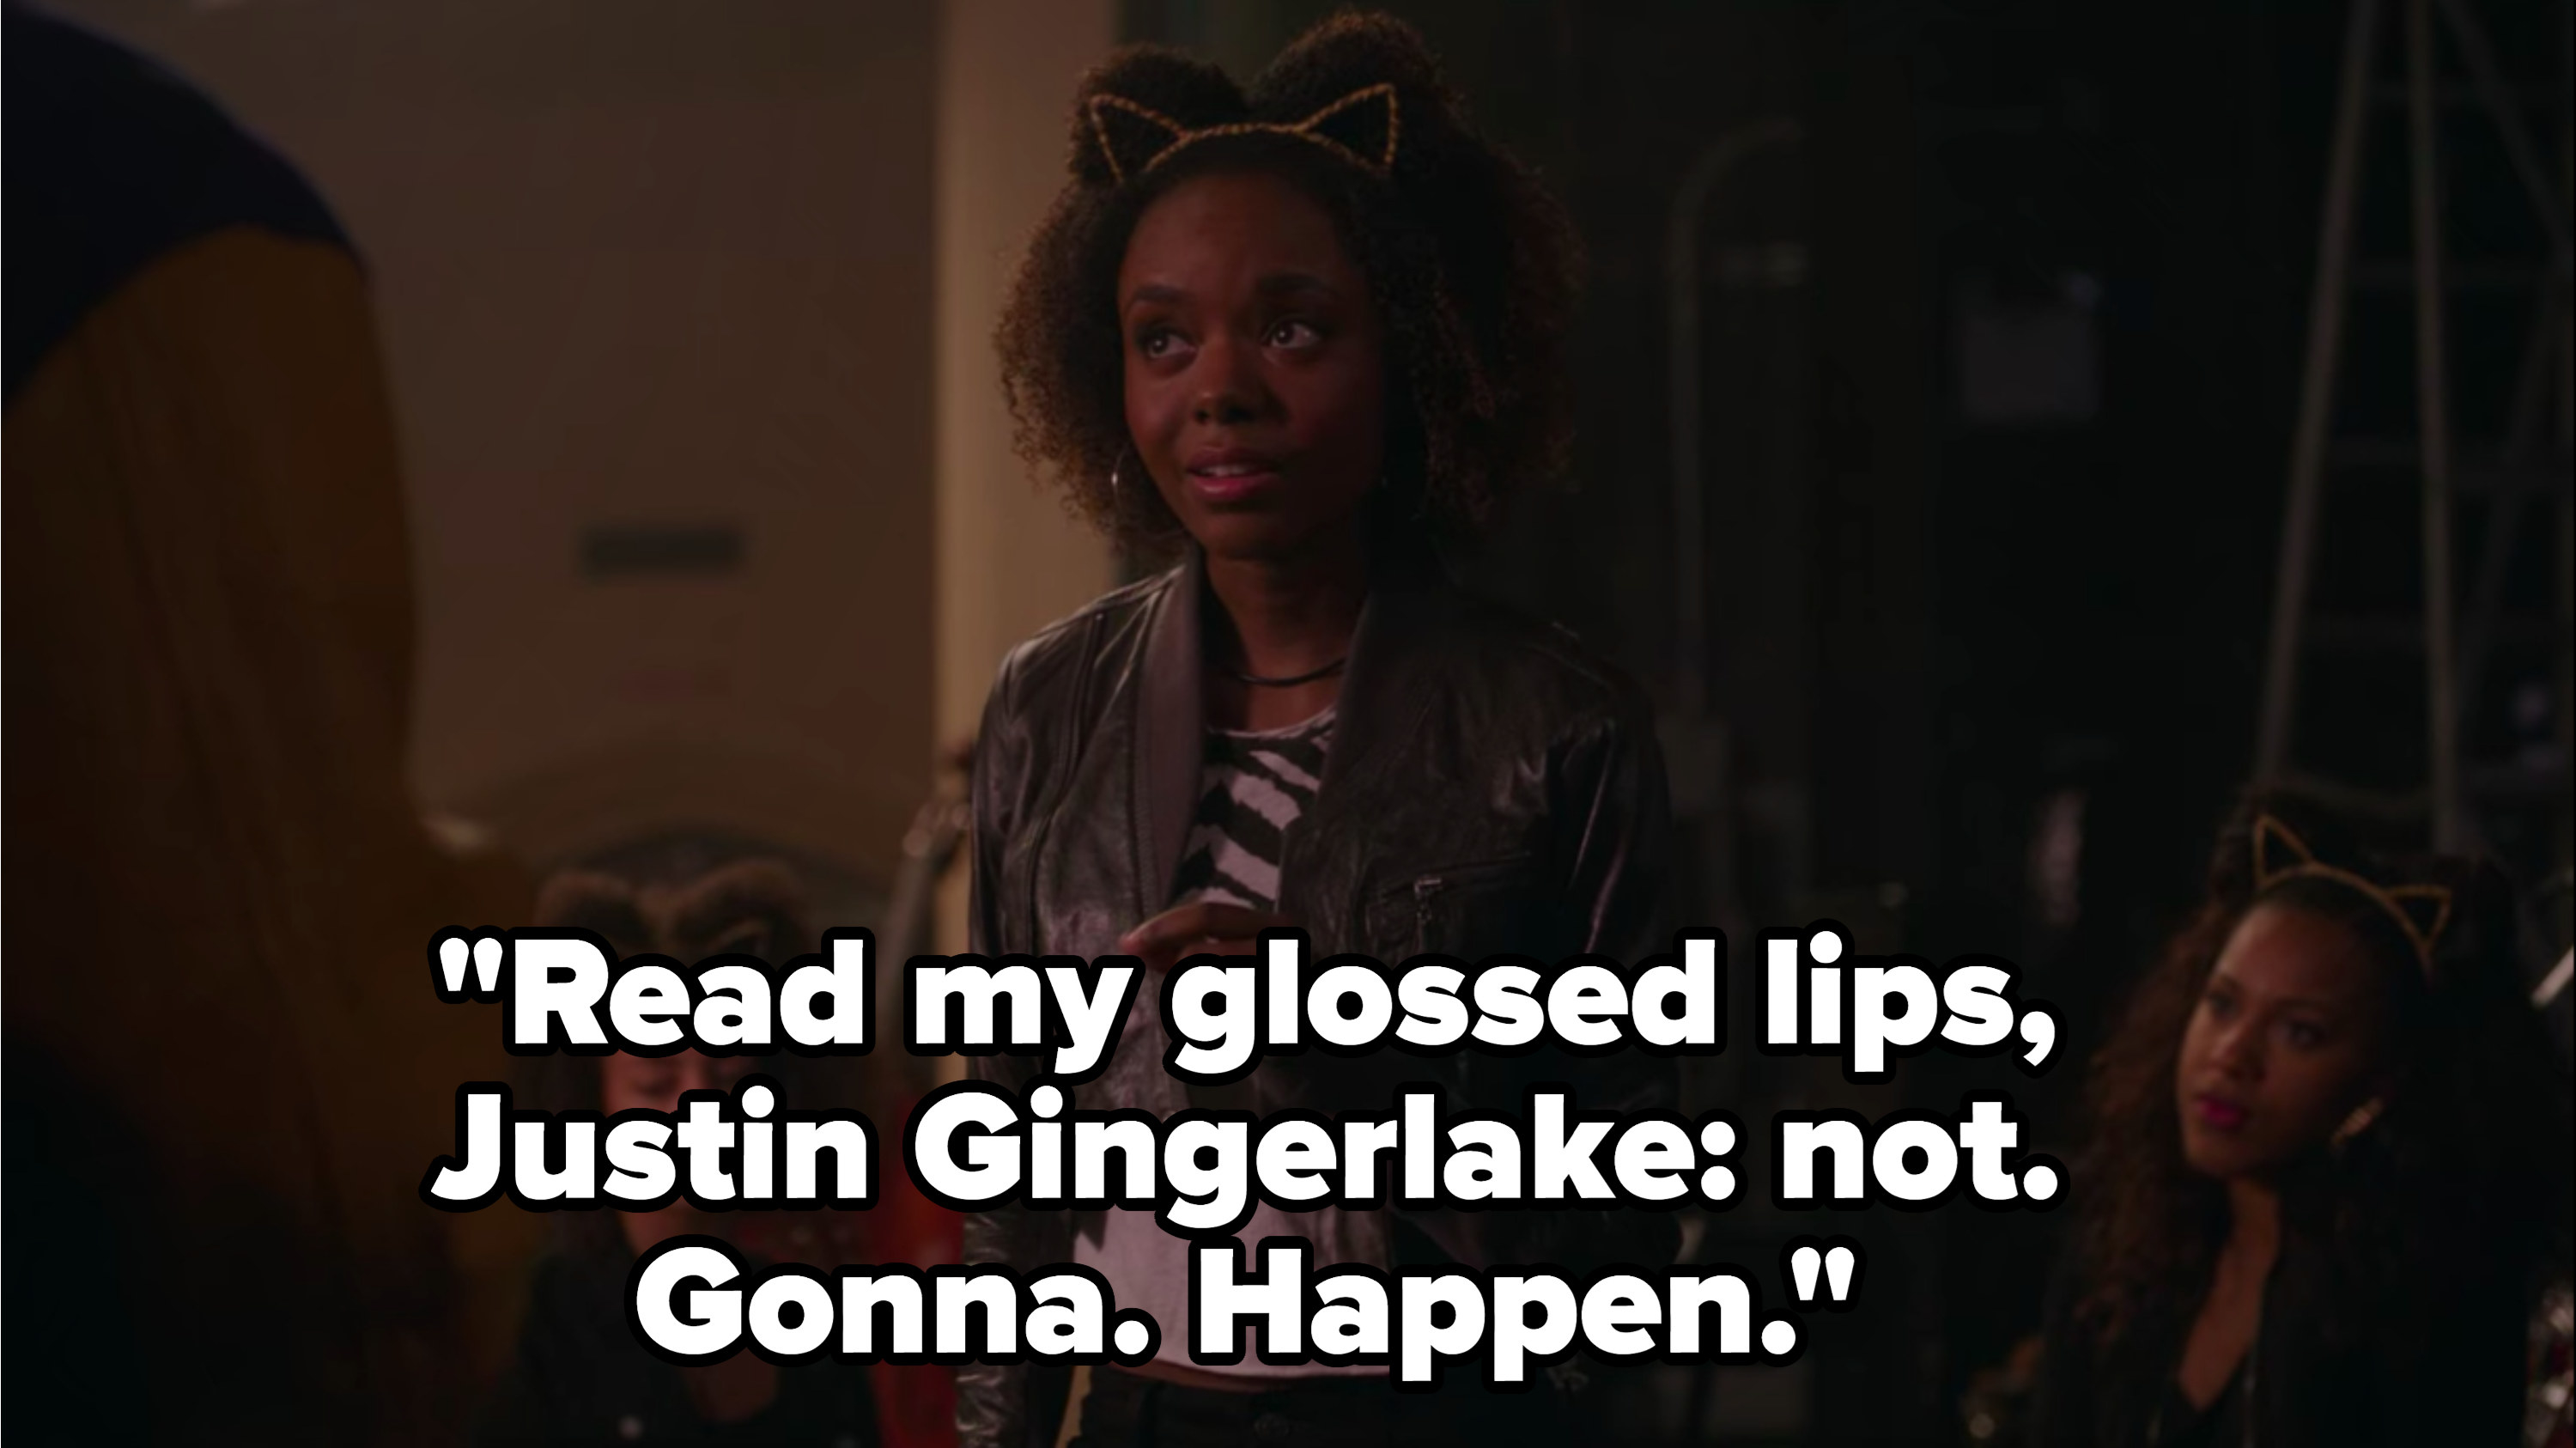 Josie: &quot;Read my glossed lips Justin Gingerlake, not gonna happen&quot;